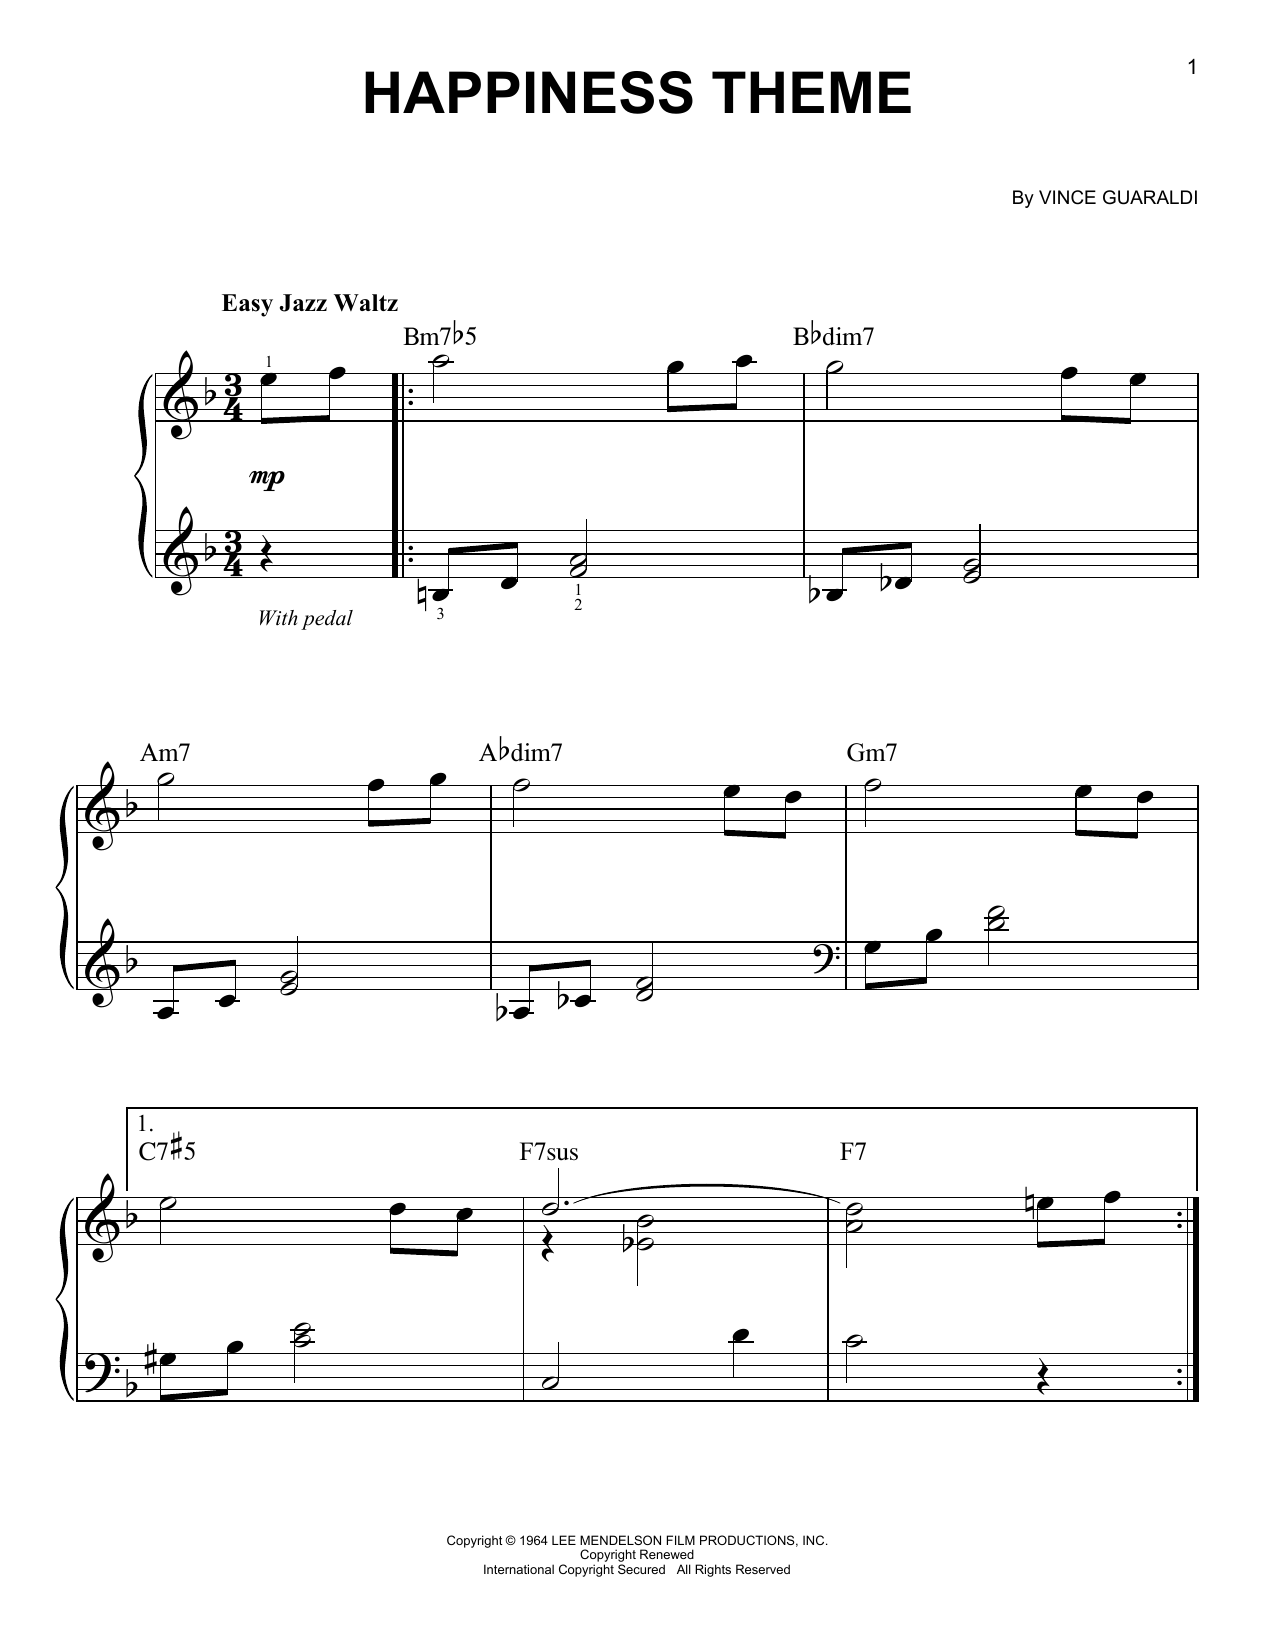 Vince Guaraldi Happiness Theme sheet music notes and chords. Download Printable PDF.